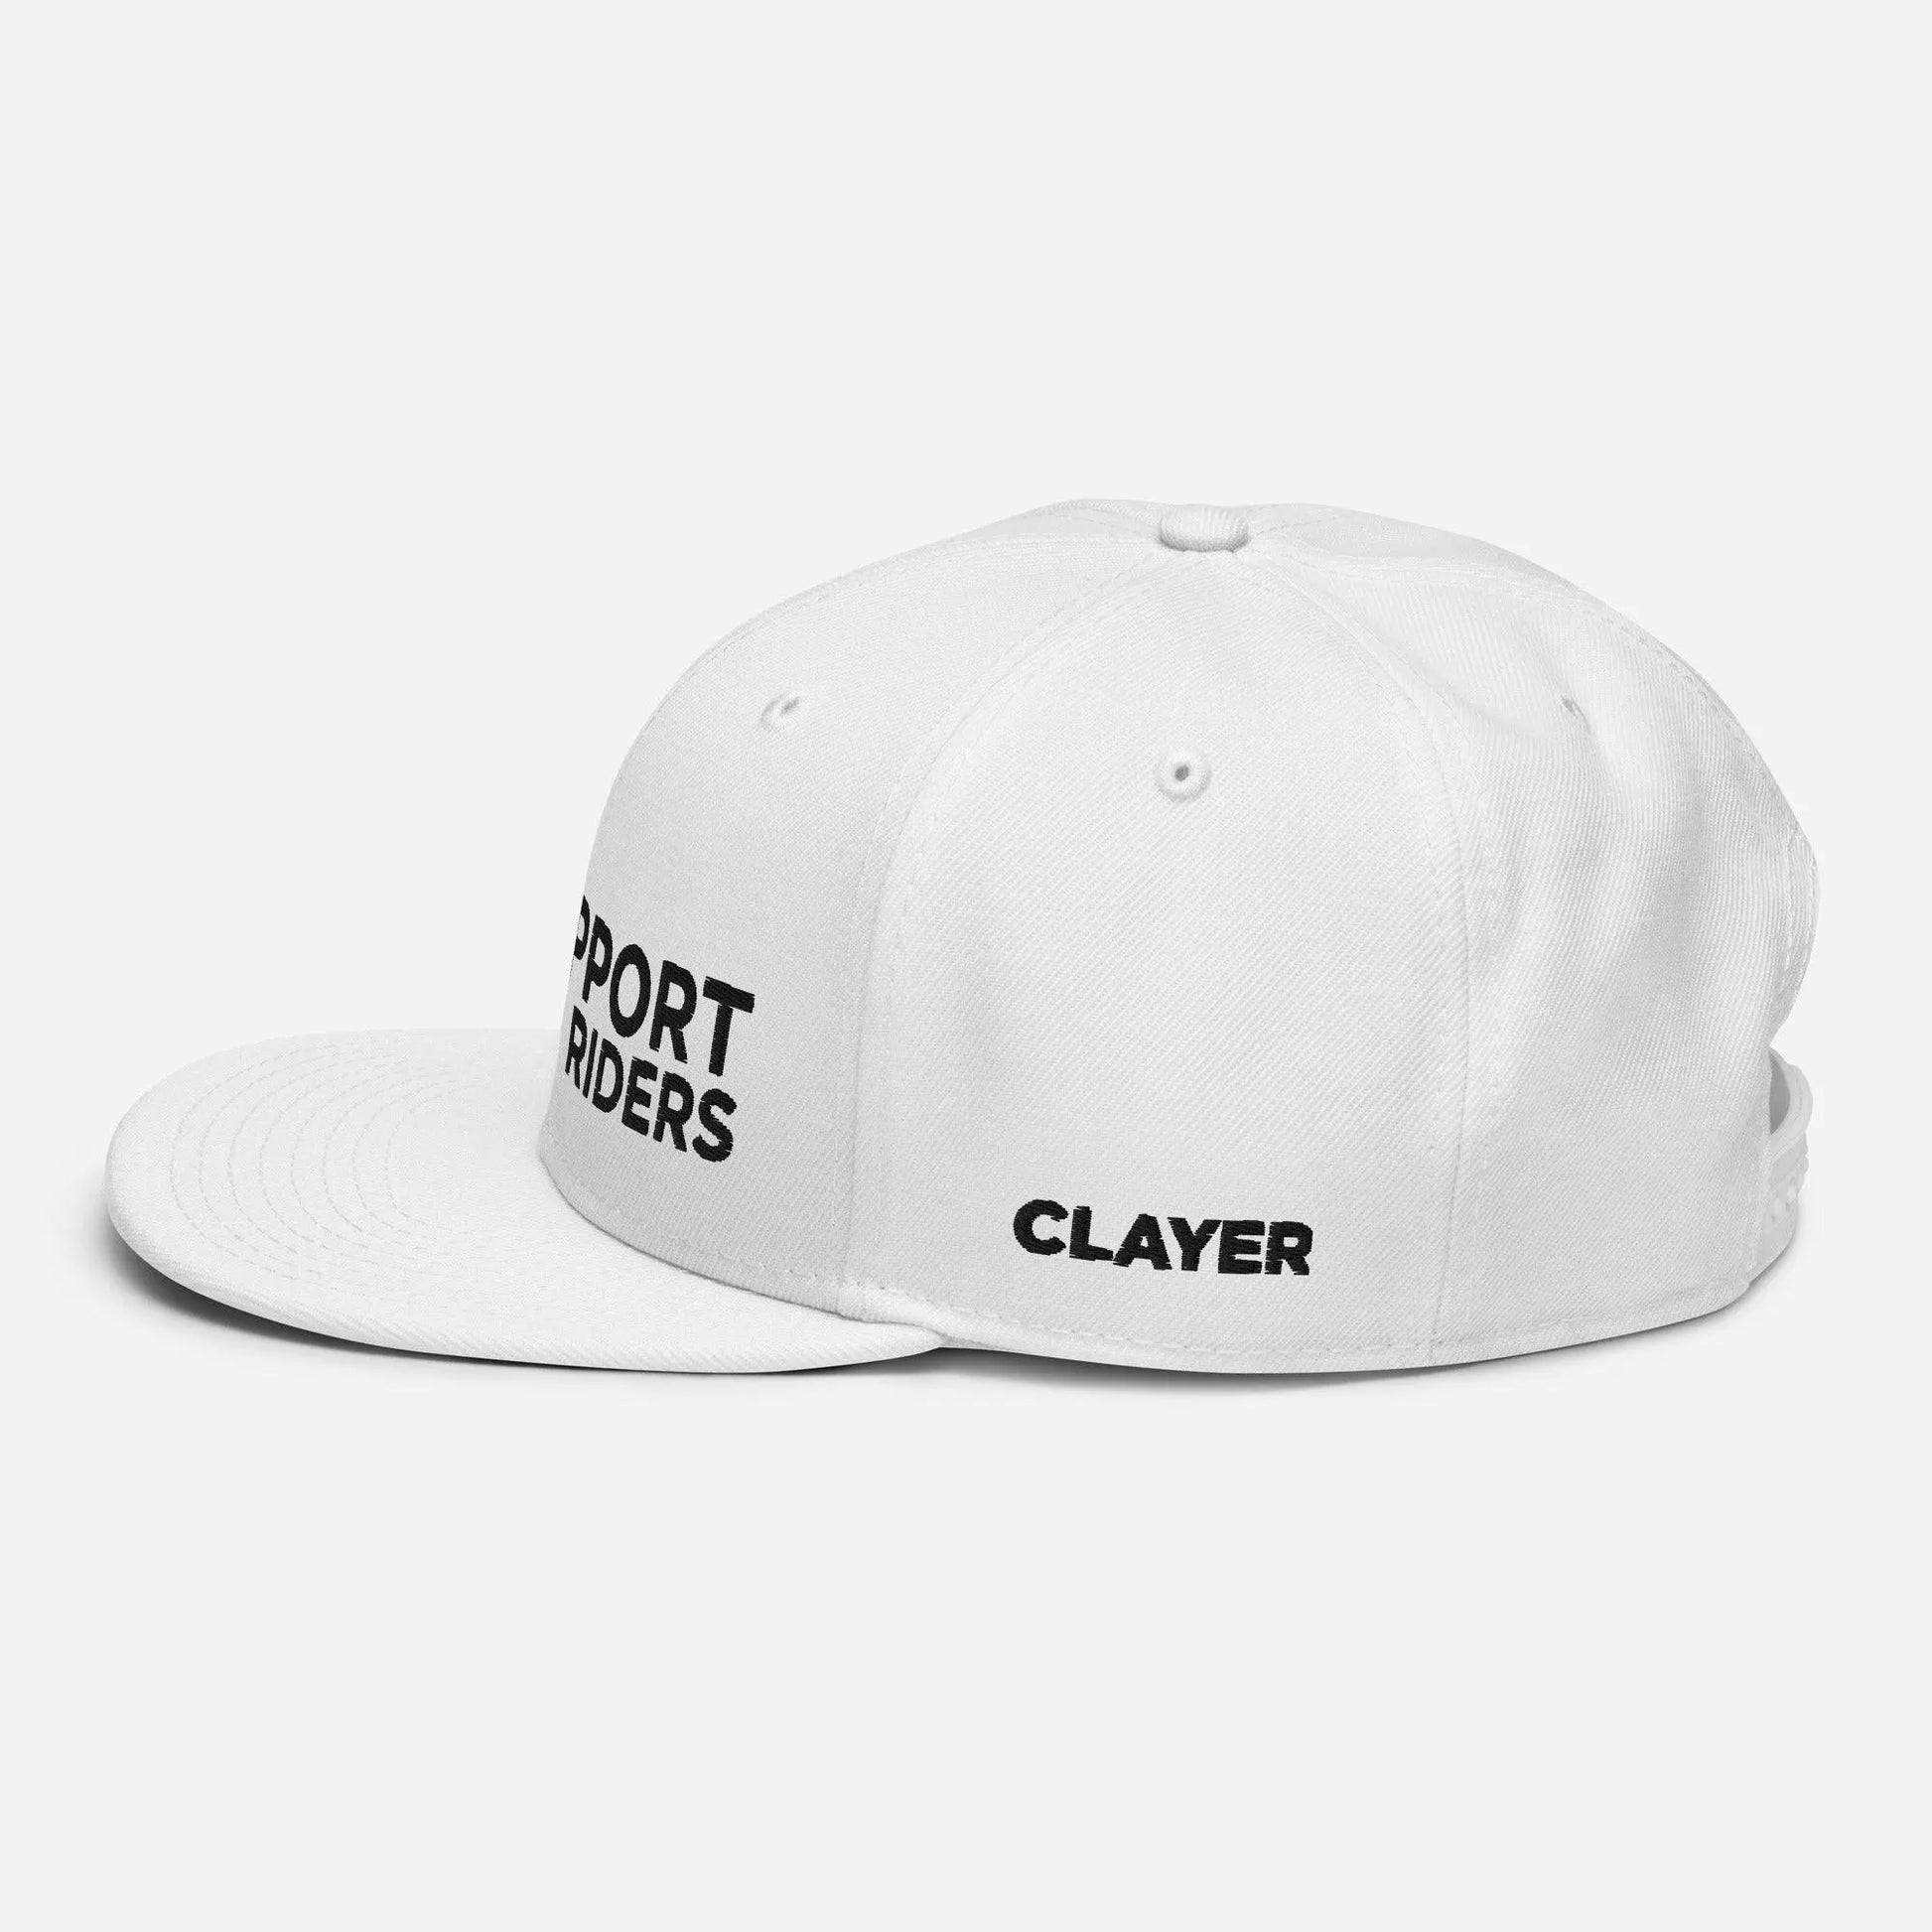 Clayer - Support Riders - Snapback Hat - CLAYER